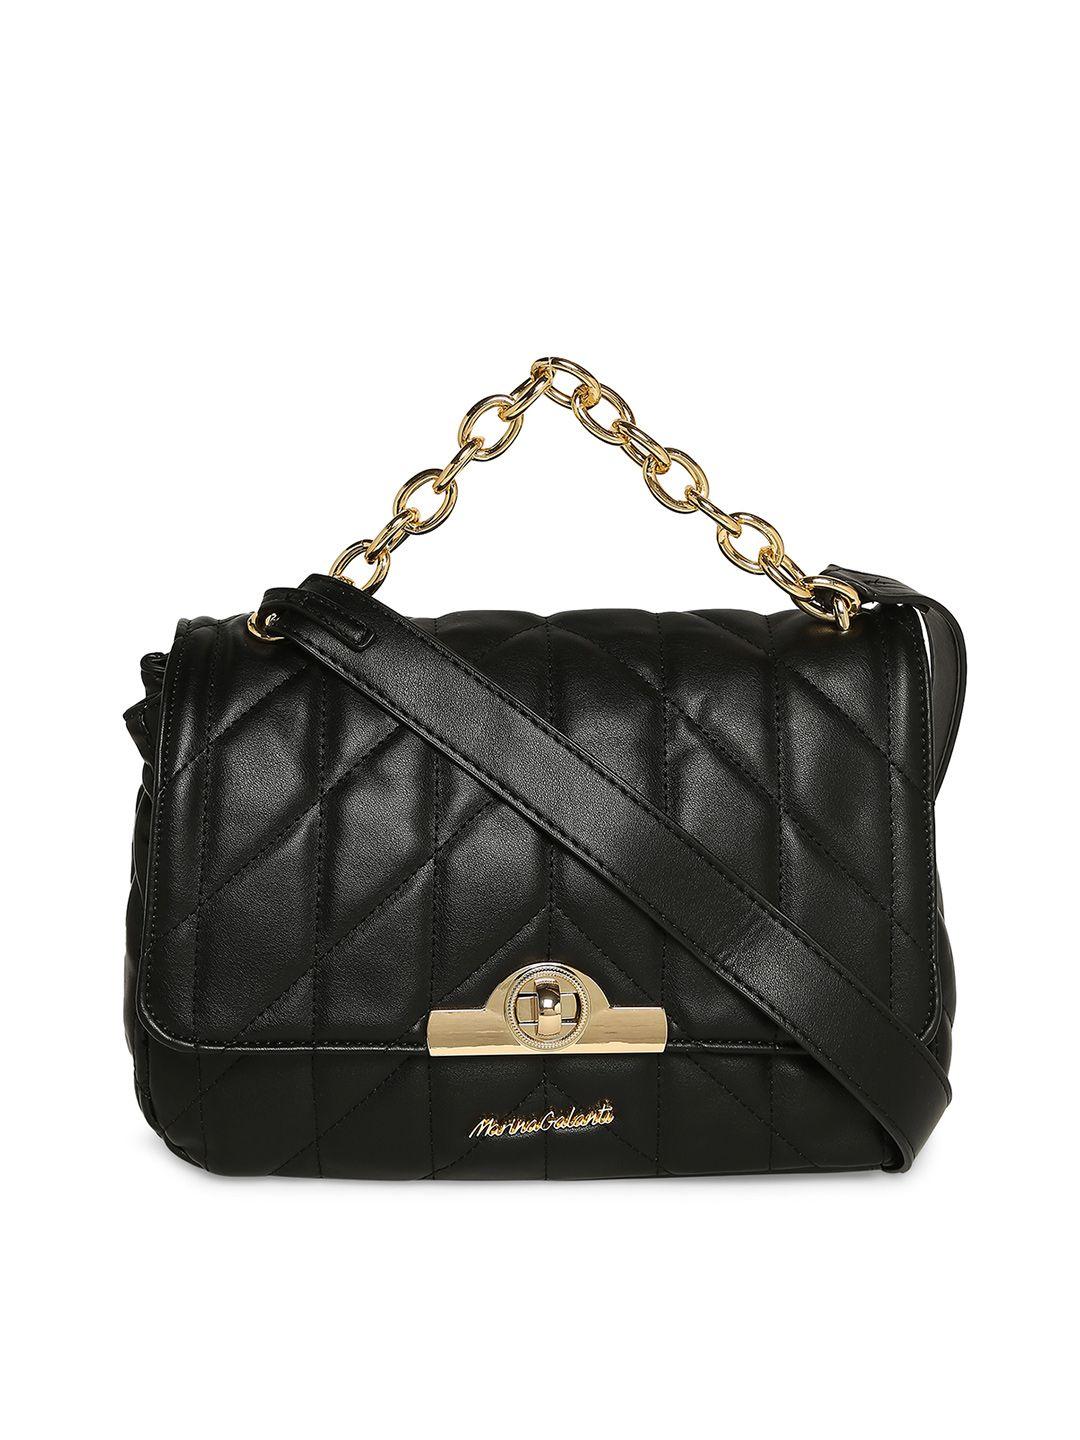 marina galanti quilted structured satchel